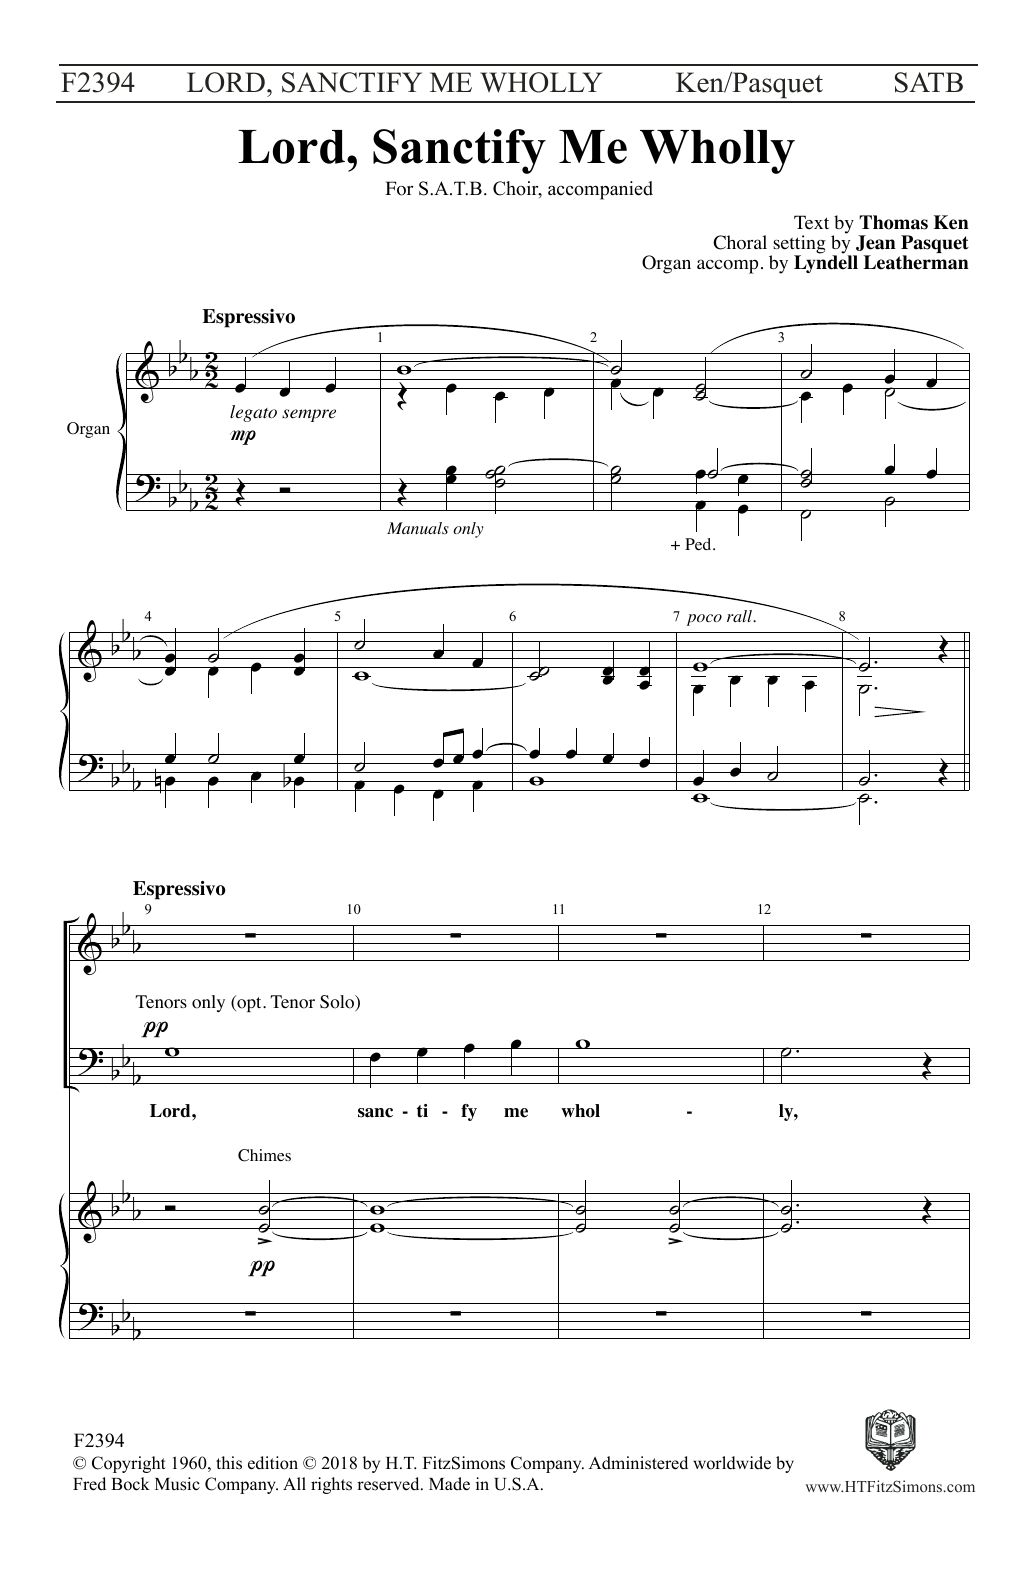 Download Jean Pasquet Lord, Sanctify Me Wholly Sheet Music